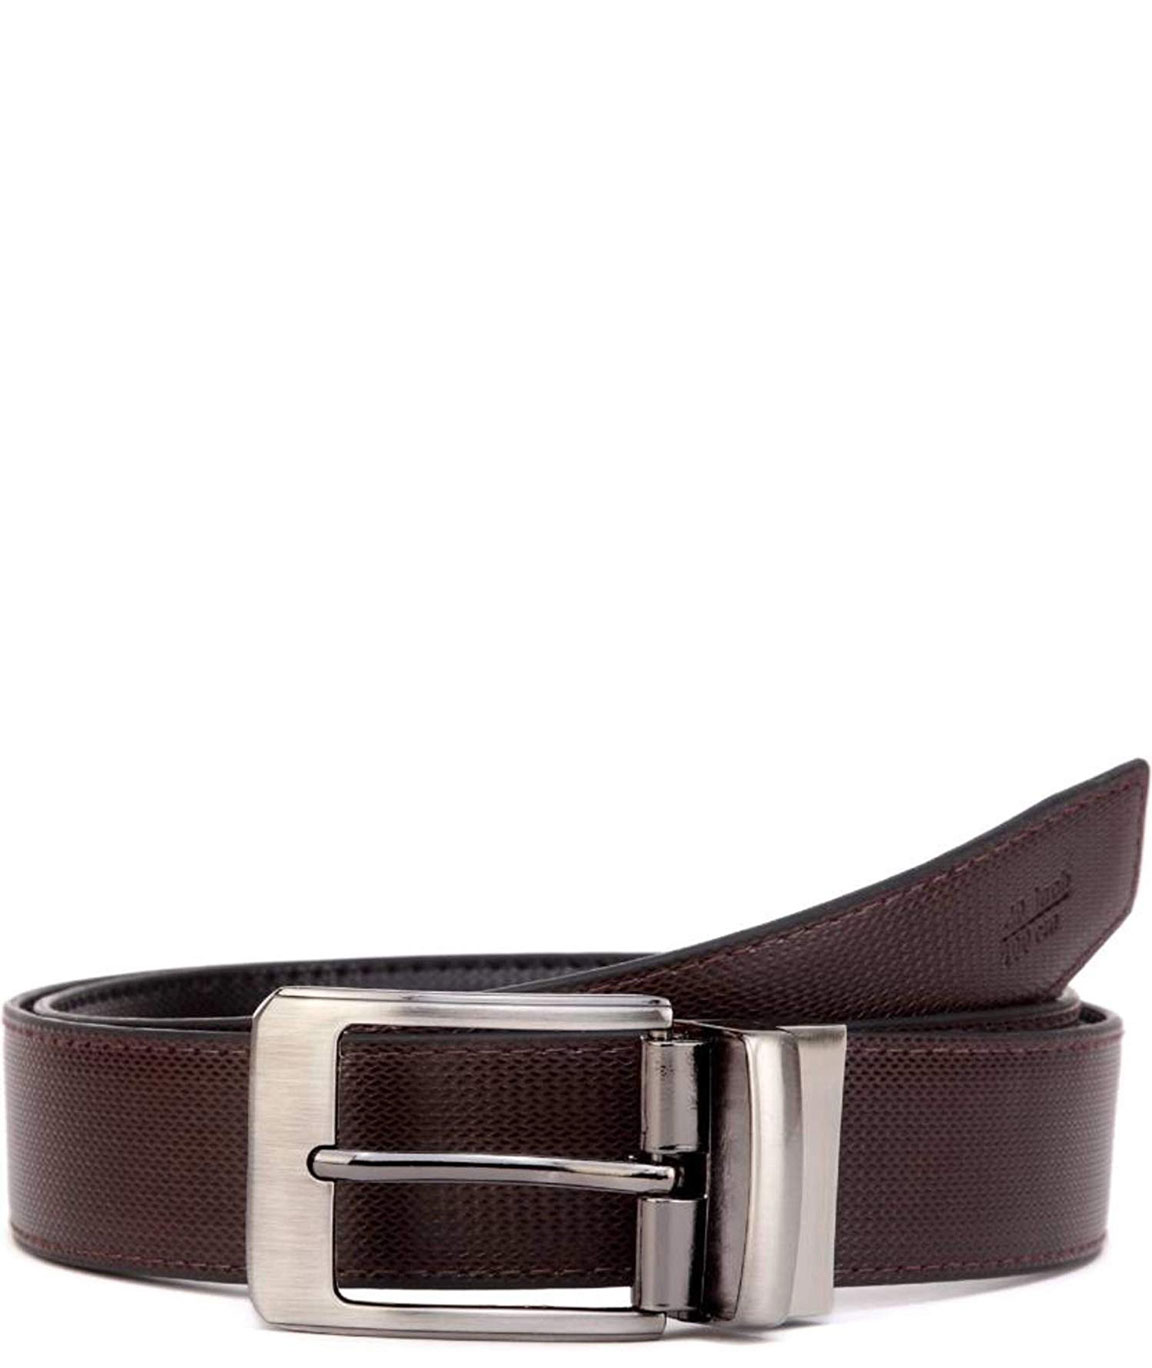 ZORO Mens Genuine Leather Belt (1 Year Guarantee) - belts for mens - belts  for men casual stylish leather- belts for men formal branded, mens belt,  brown belt, formal belt with army buckle